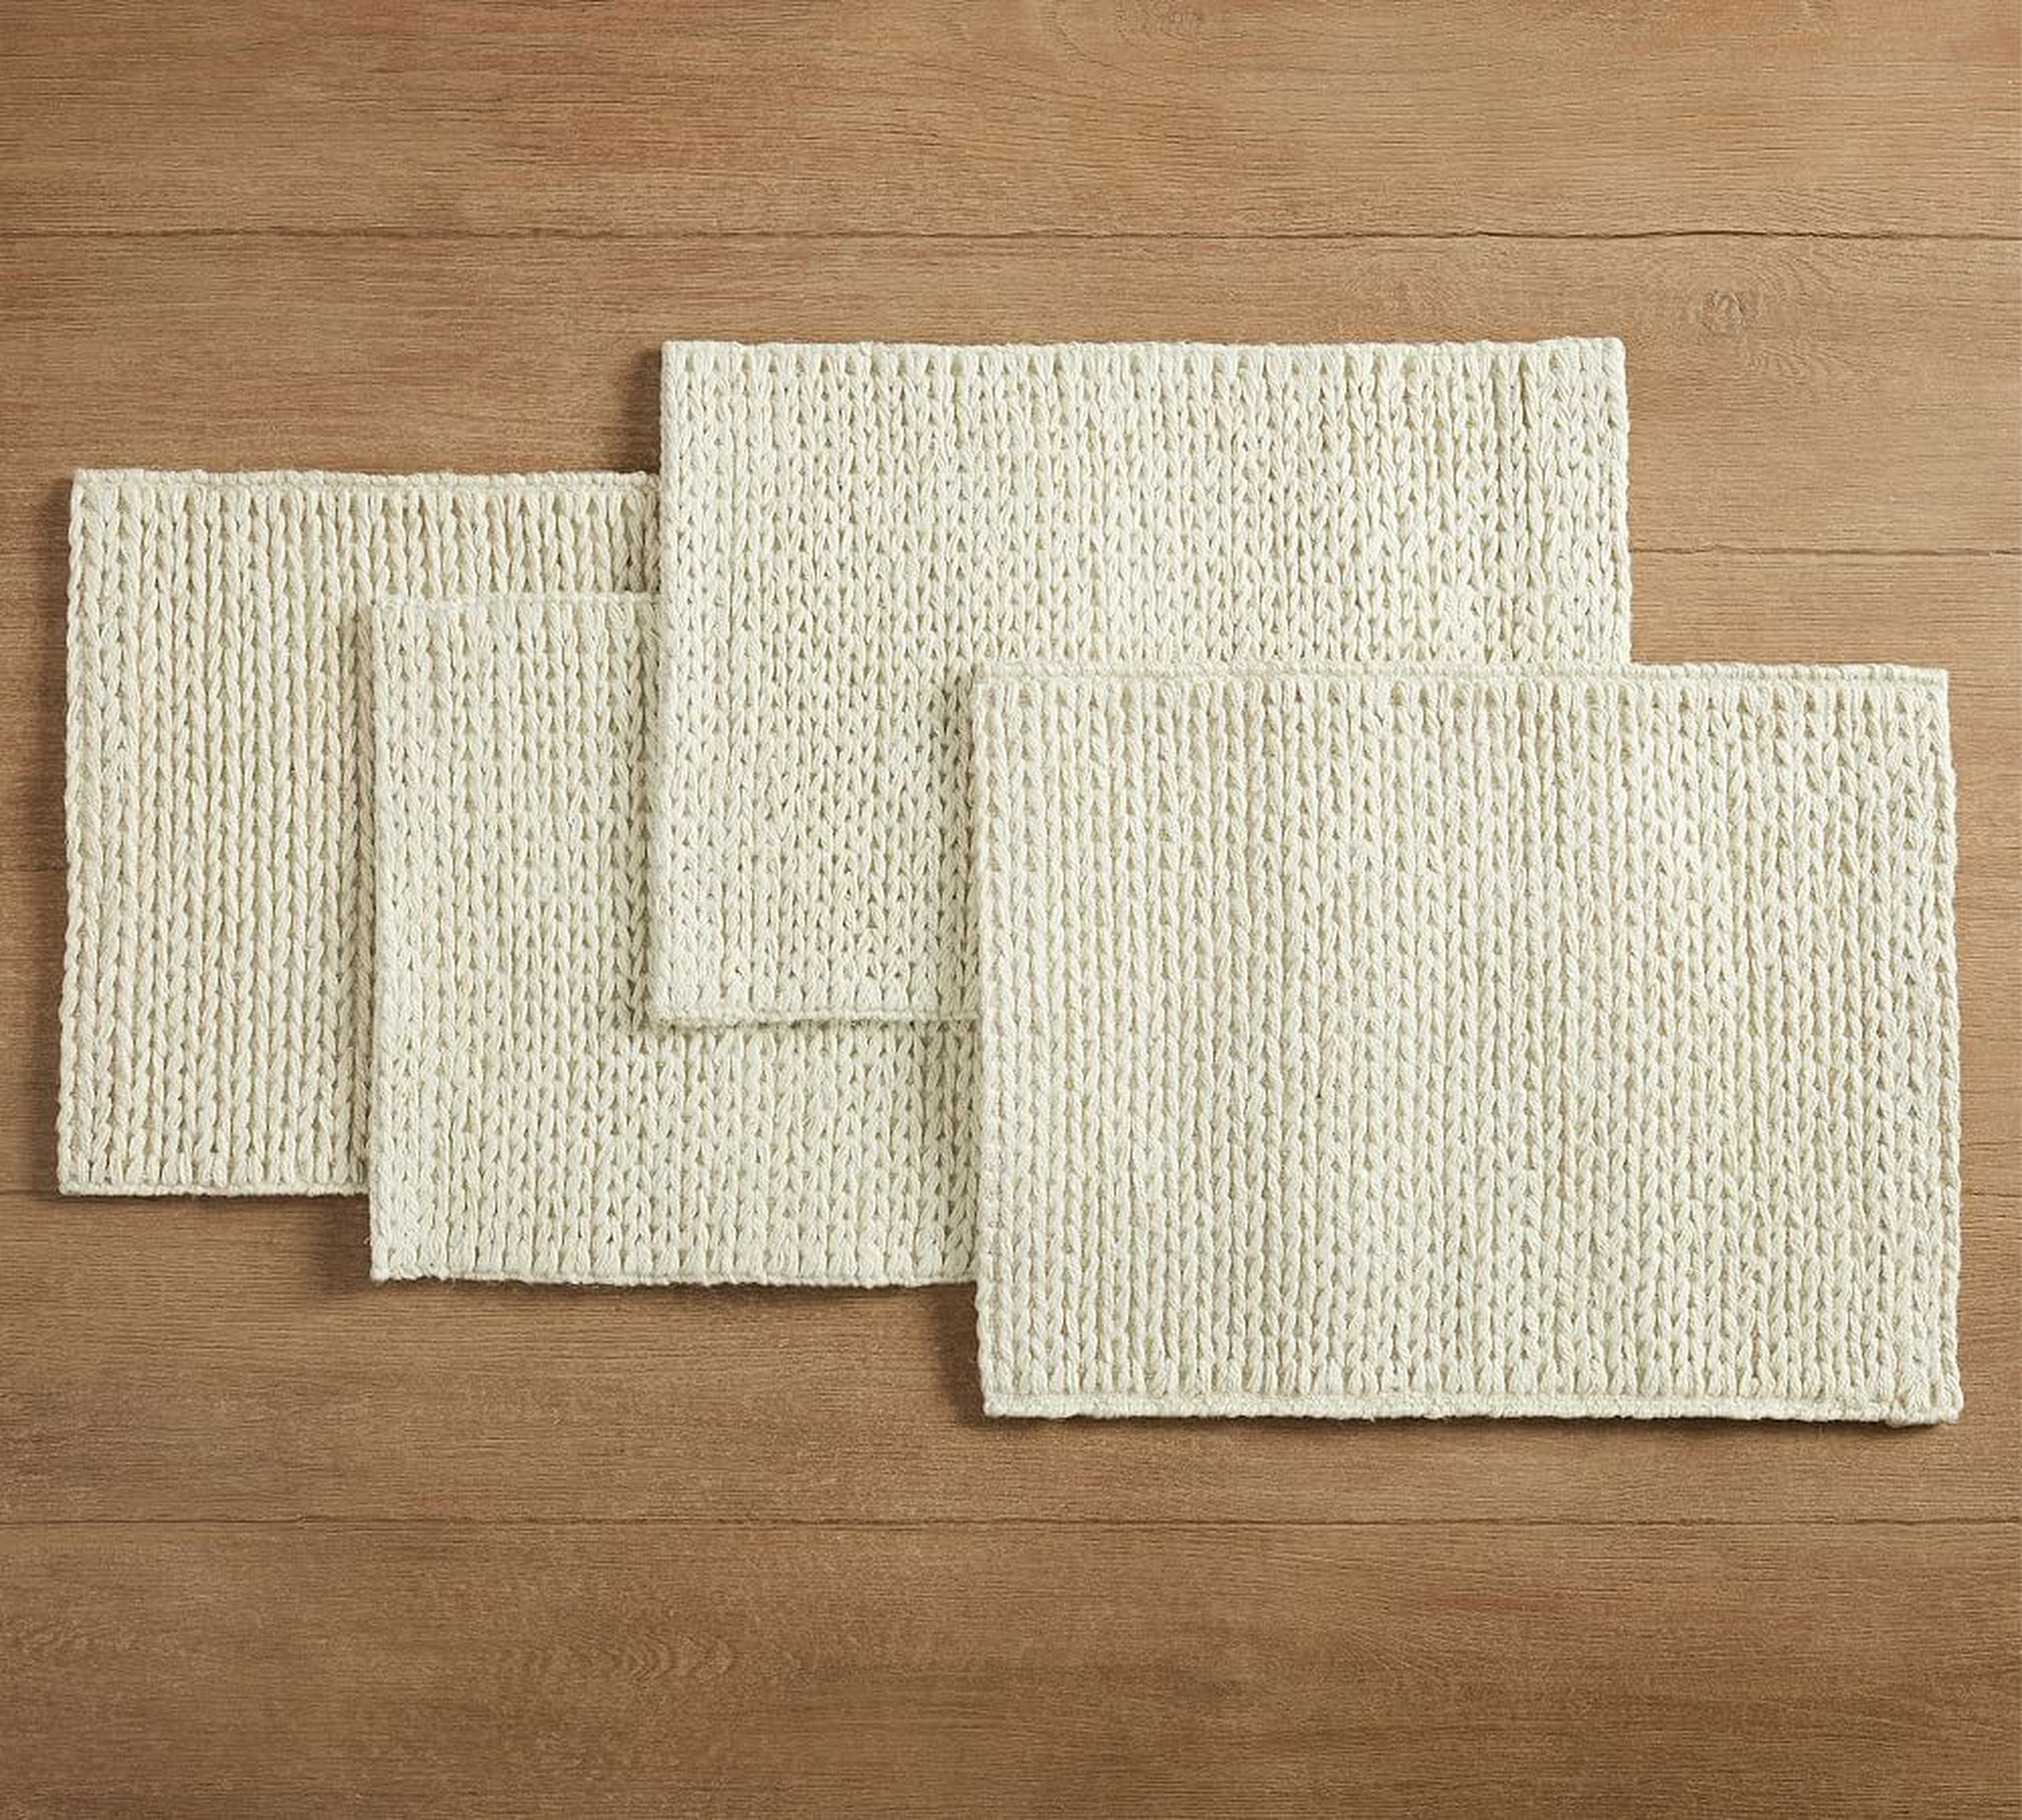 Handwoven Jute Placemats, Set of 4 - Ivory - Pottery Barn